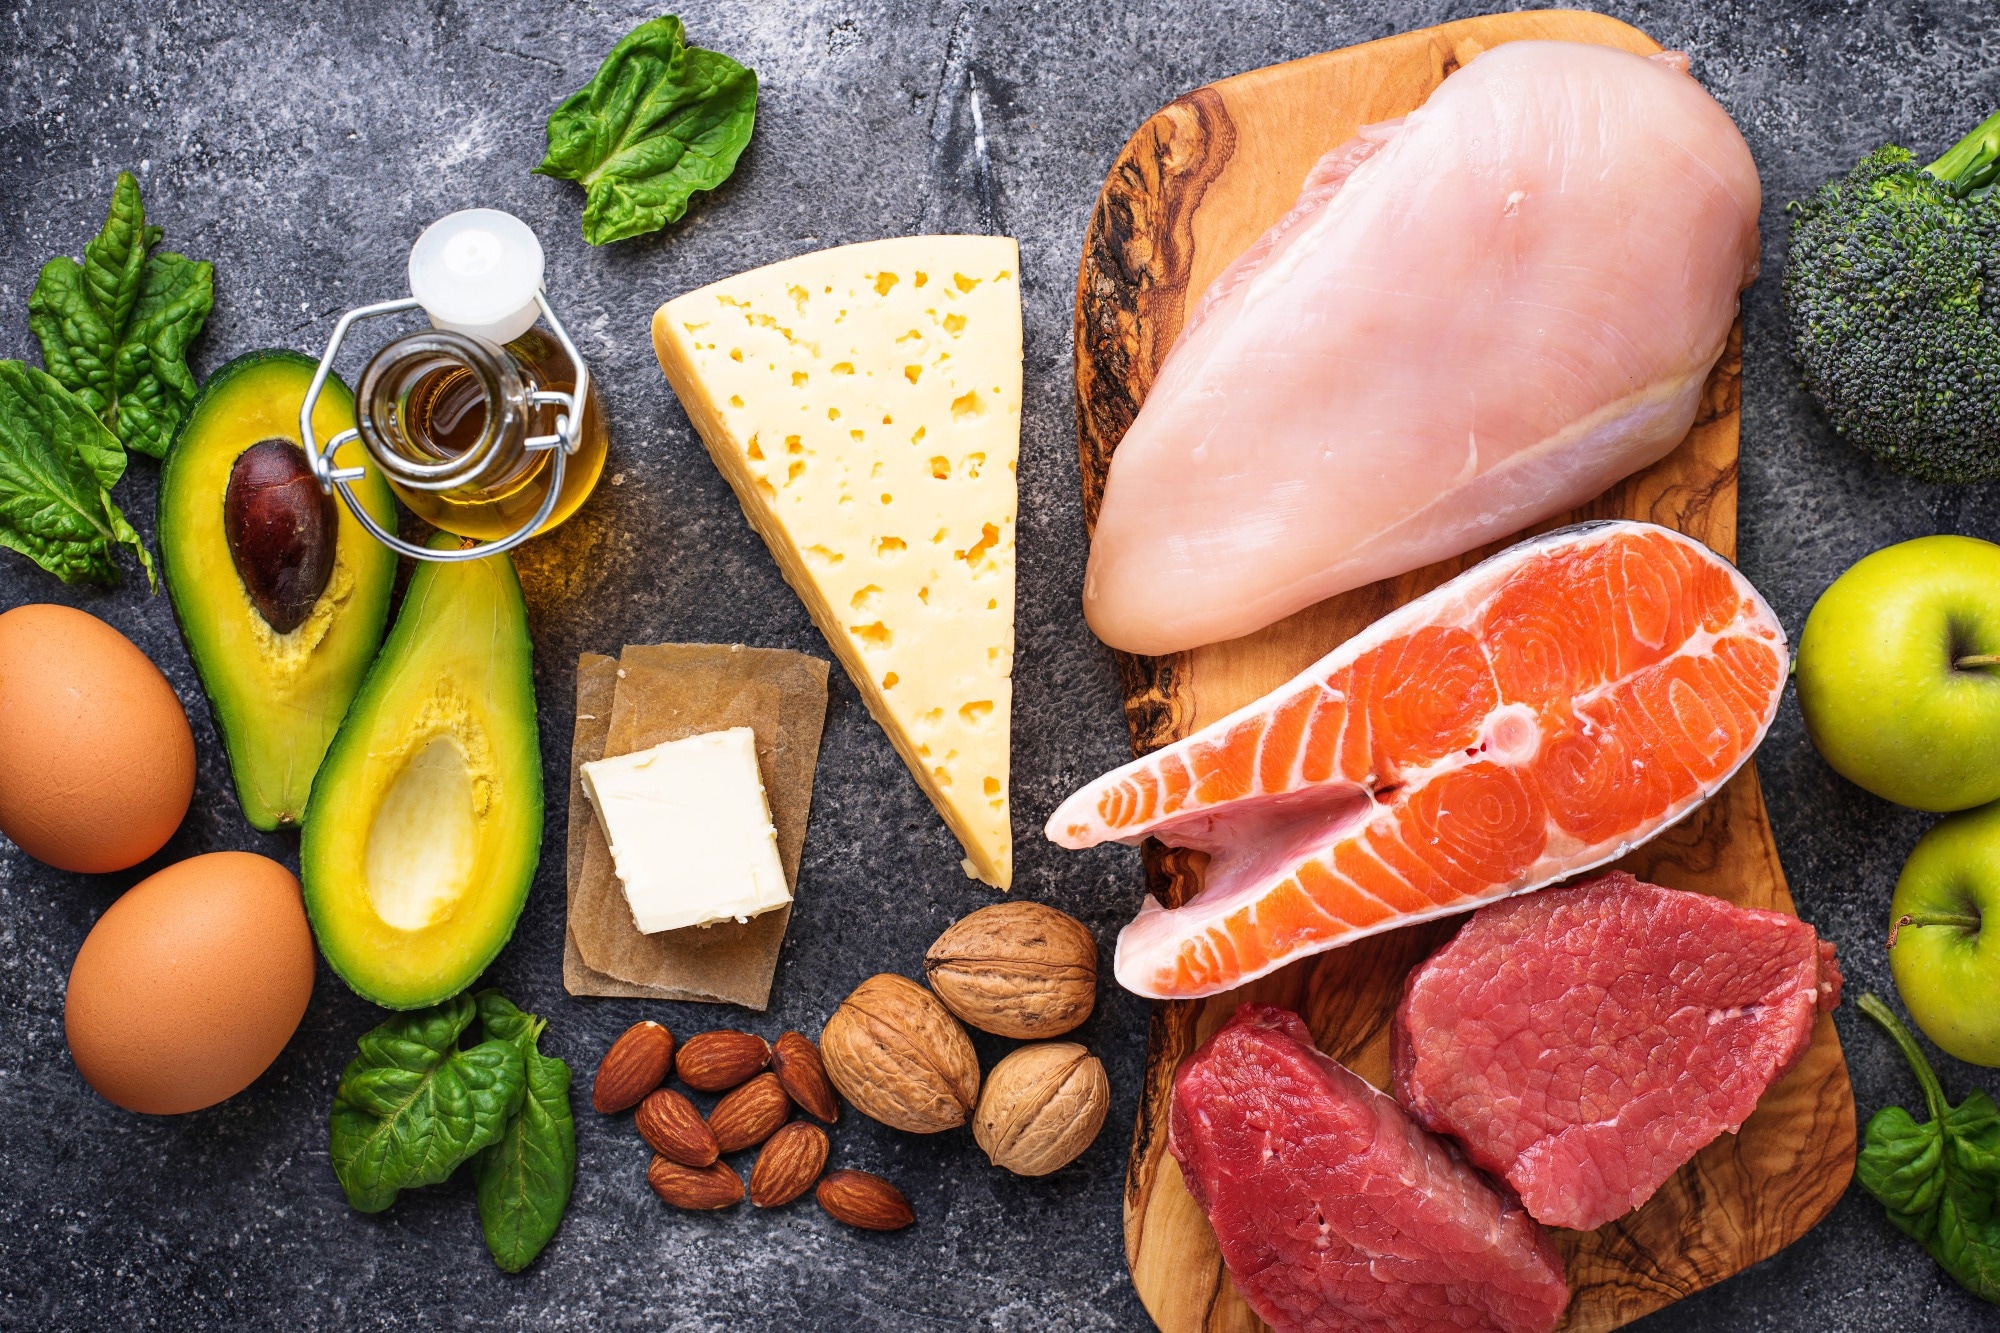 Study: Ketogenic Diet in the Treatment of Epilepsy. Image Credit: Yulia Furman/Shutterstock.com